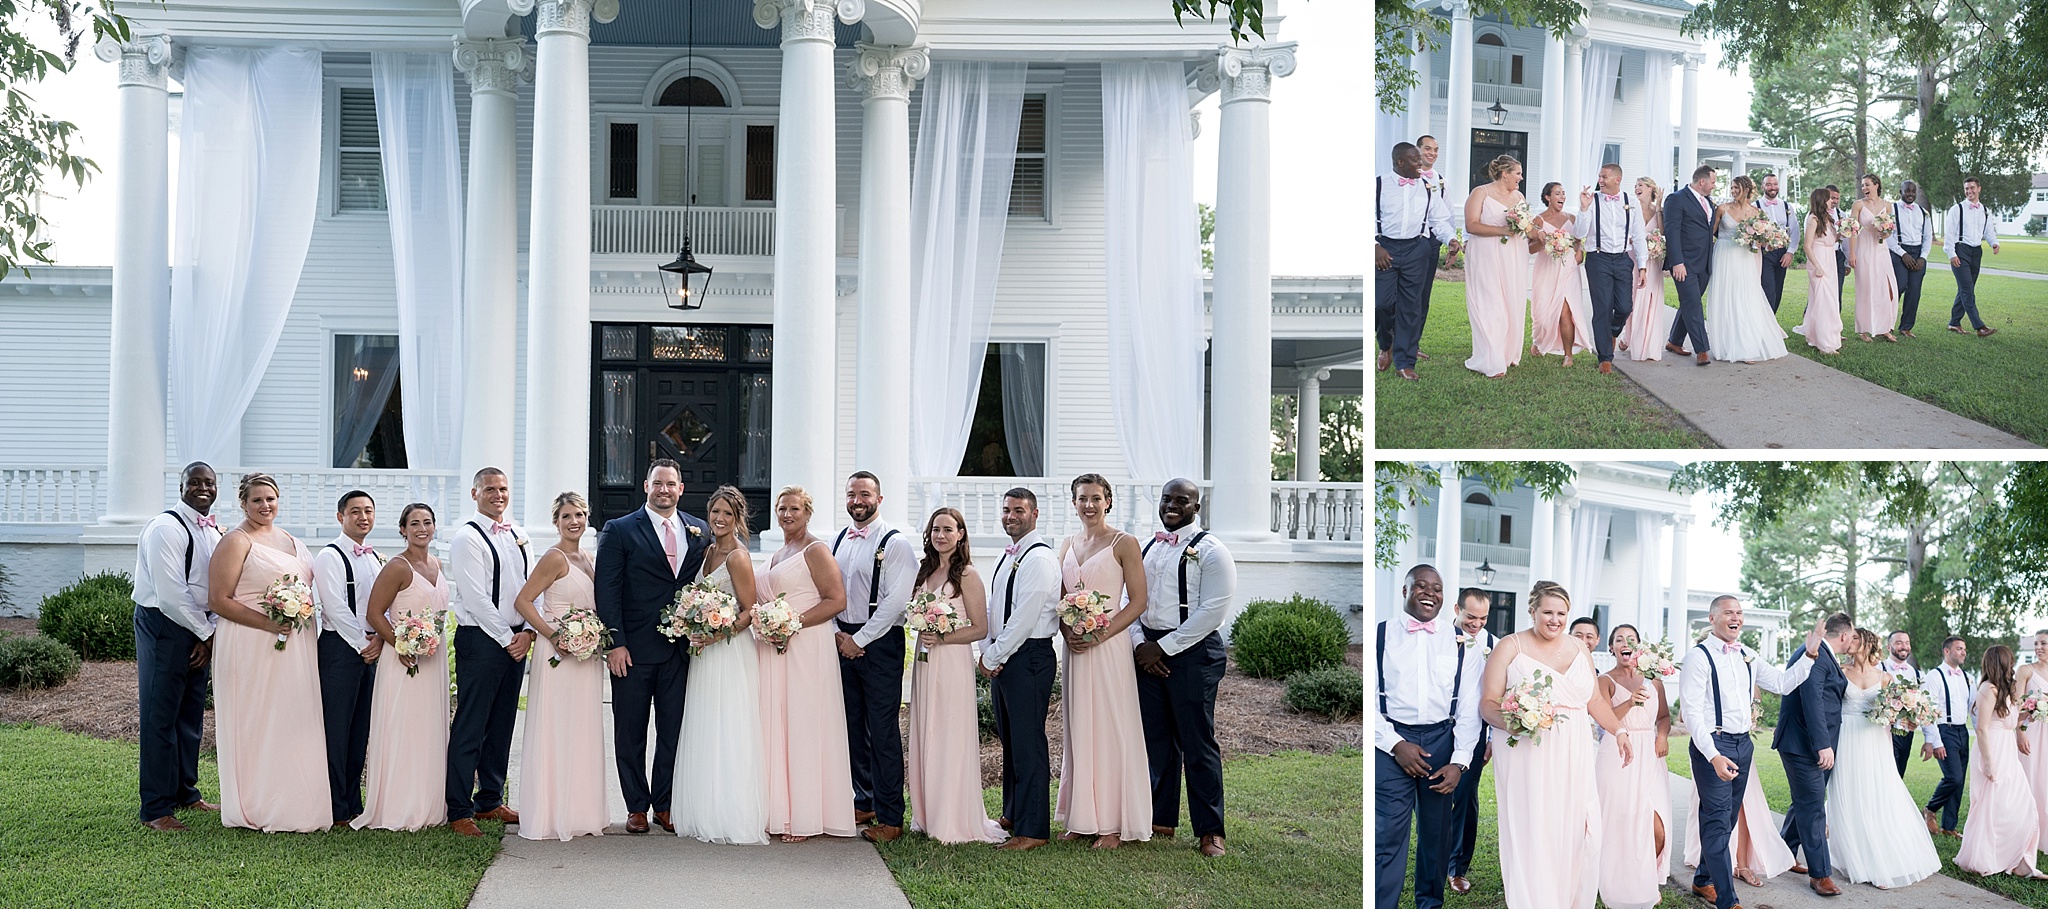 Stephanie Kyle River Forest Manor Wedding Preview Belhaven Nc Photographer Will Greene Photo Video